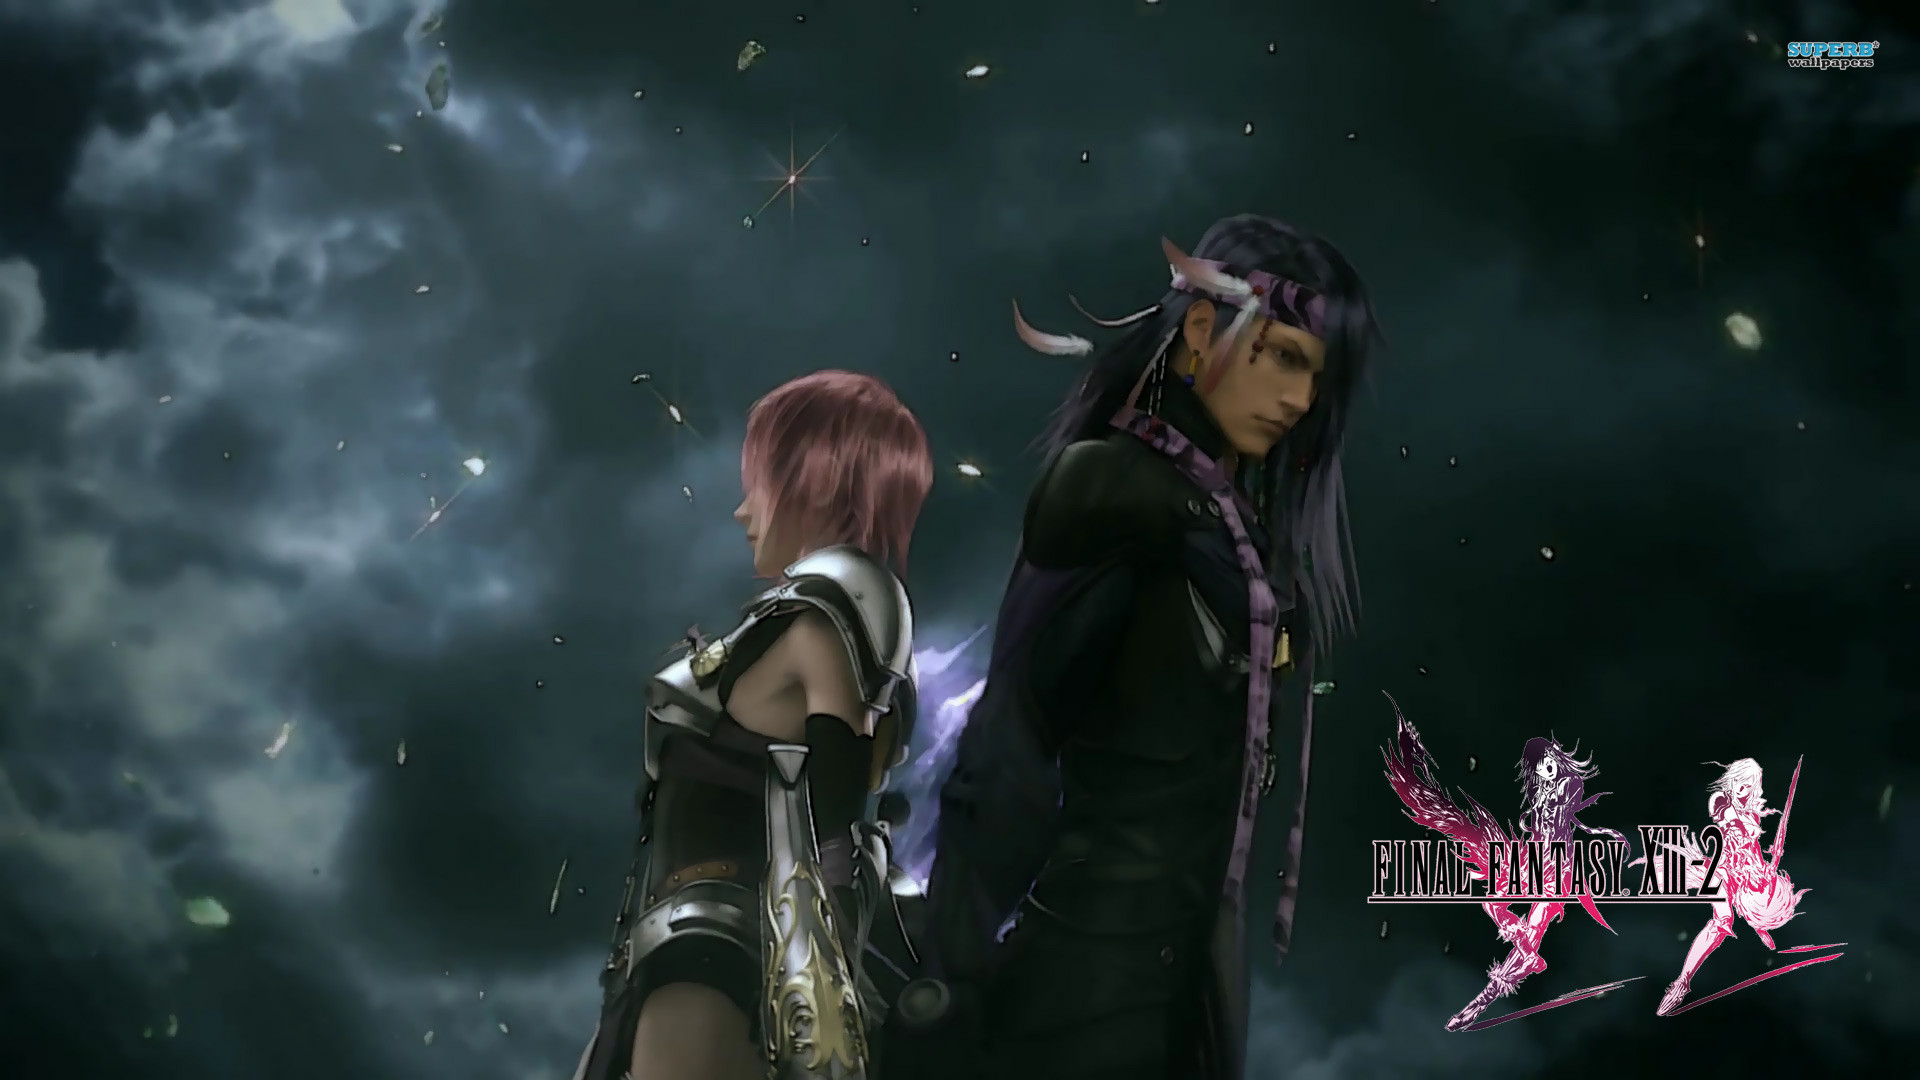 1920x1080 Lightning and Caius - Final Fantasy XIII-2 wallpaper